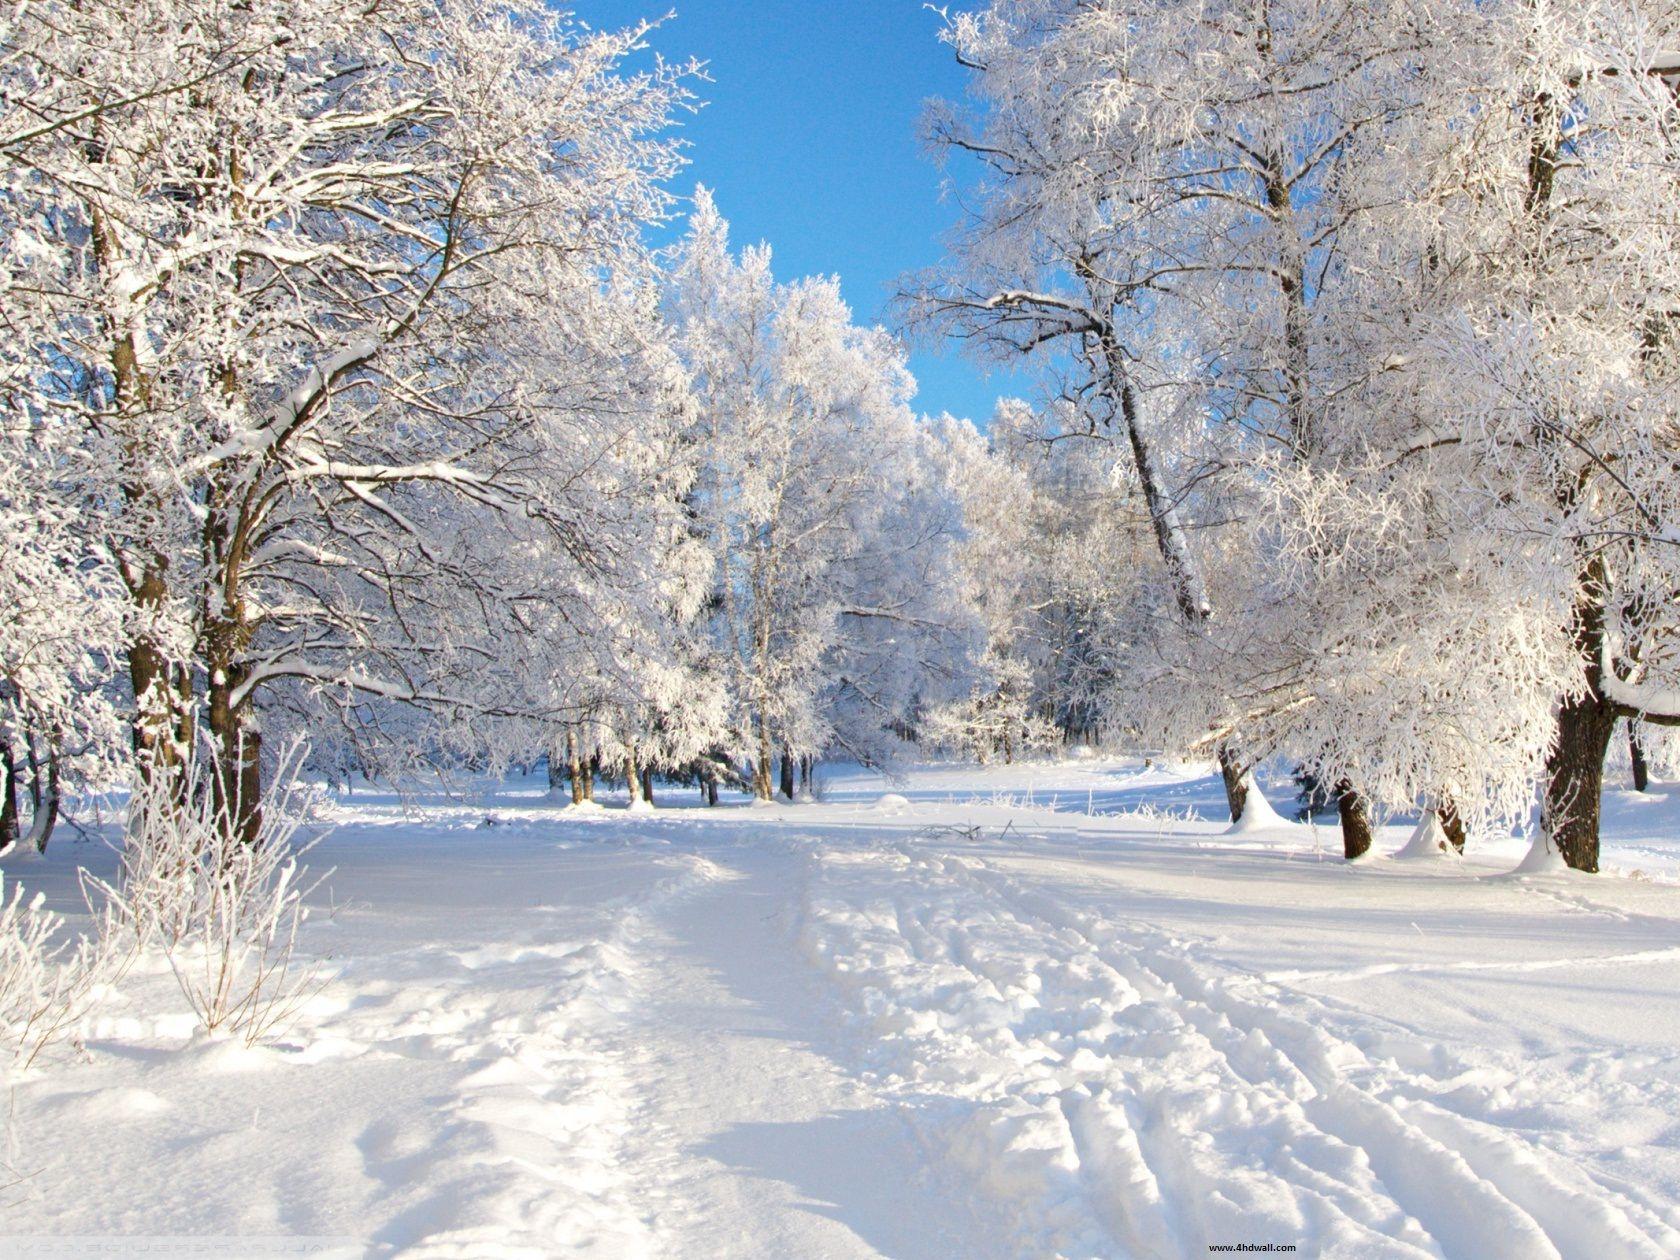 Wallpapers Collection : +37 Best Free HD winter desktop backgrounds Backgrounds to Download